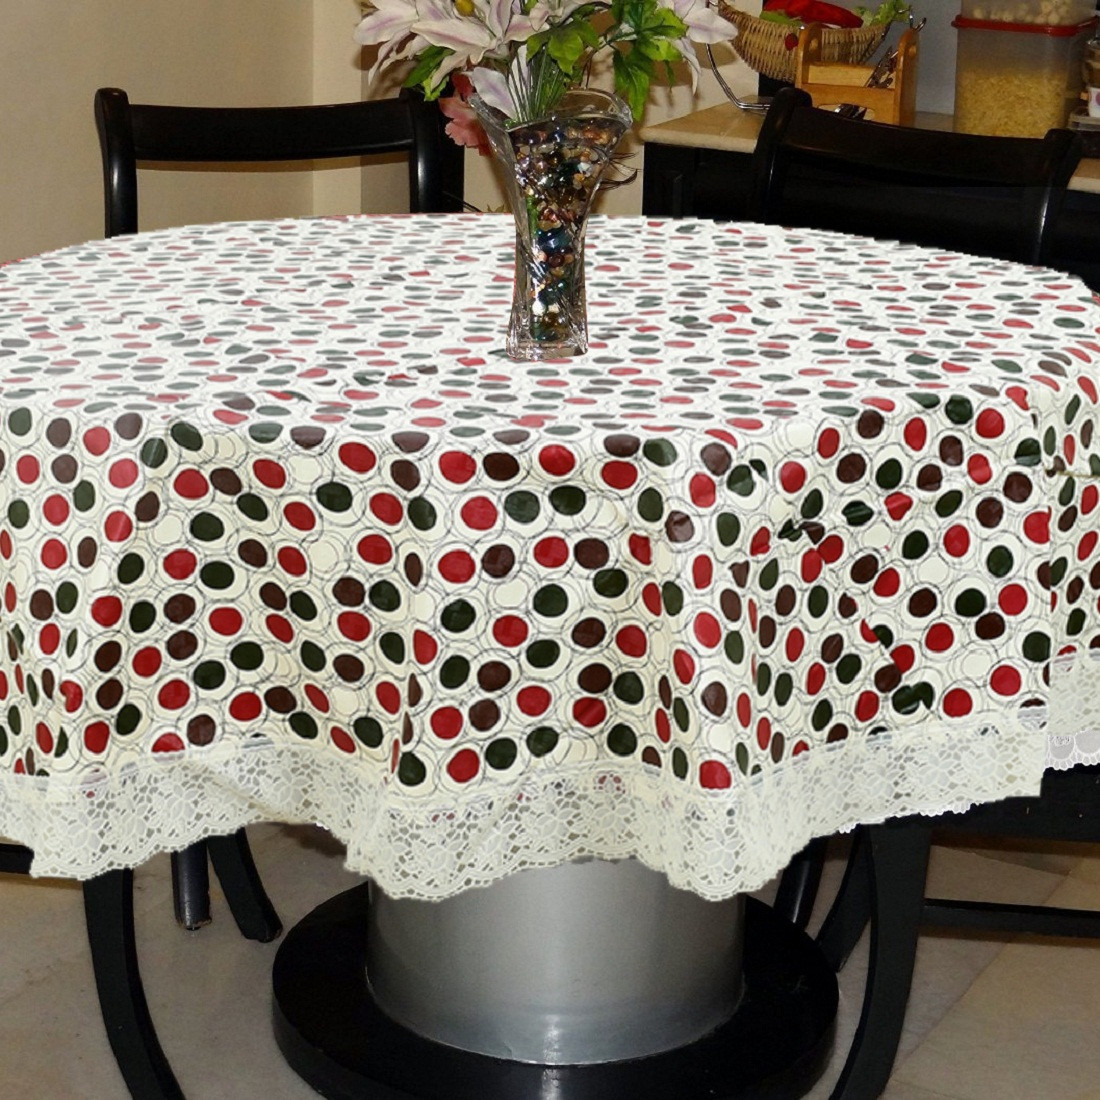 Kuber Industries Polka Dots Print Round Table Cover 72 Inch-Waterproof PVC Resistant Spillproof PVC Fabric Table Cover for Dining Room Kitchen Party (Brown)-KUBMRT11823